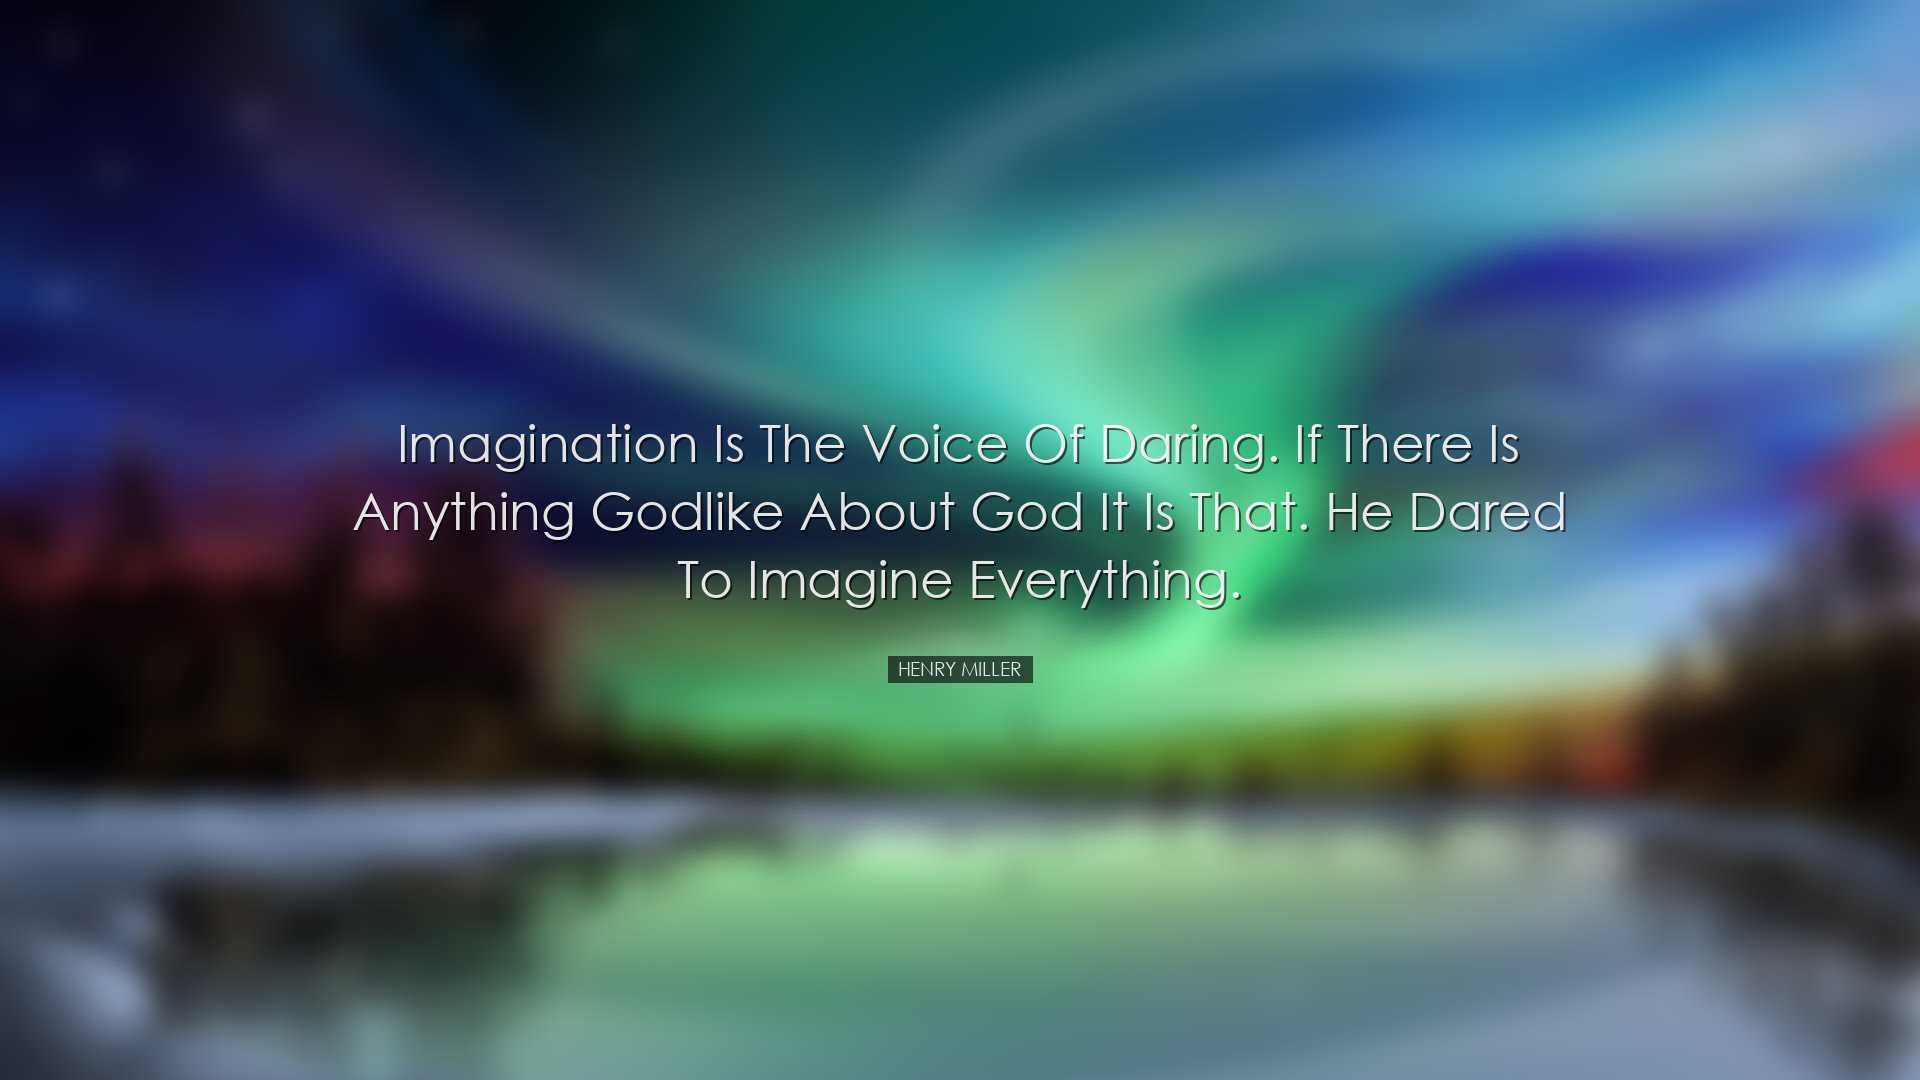 Imagination is the voice of daring. If there is anything Godlike a